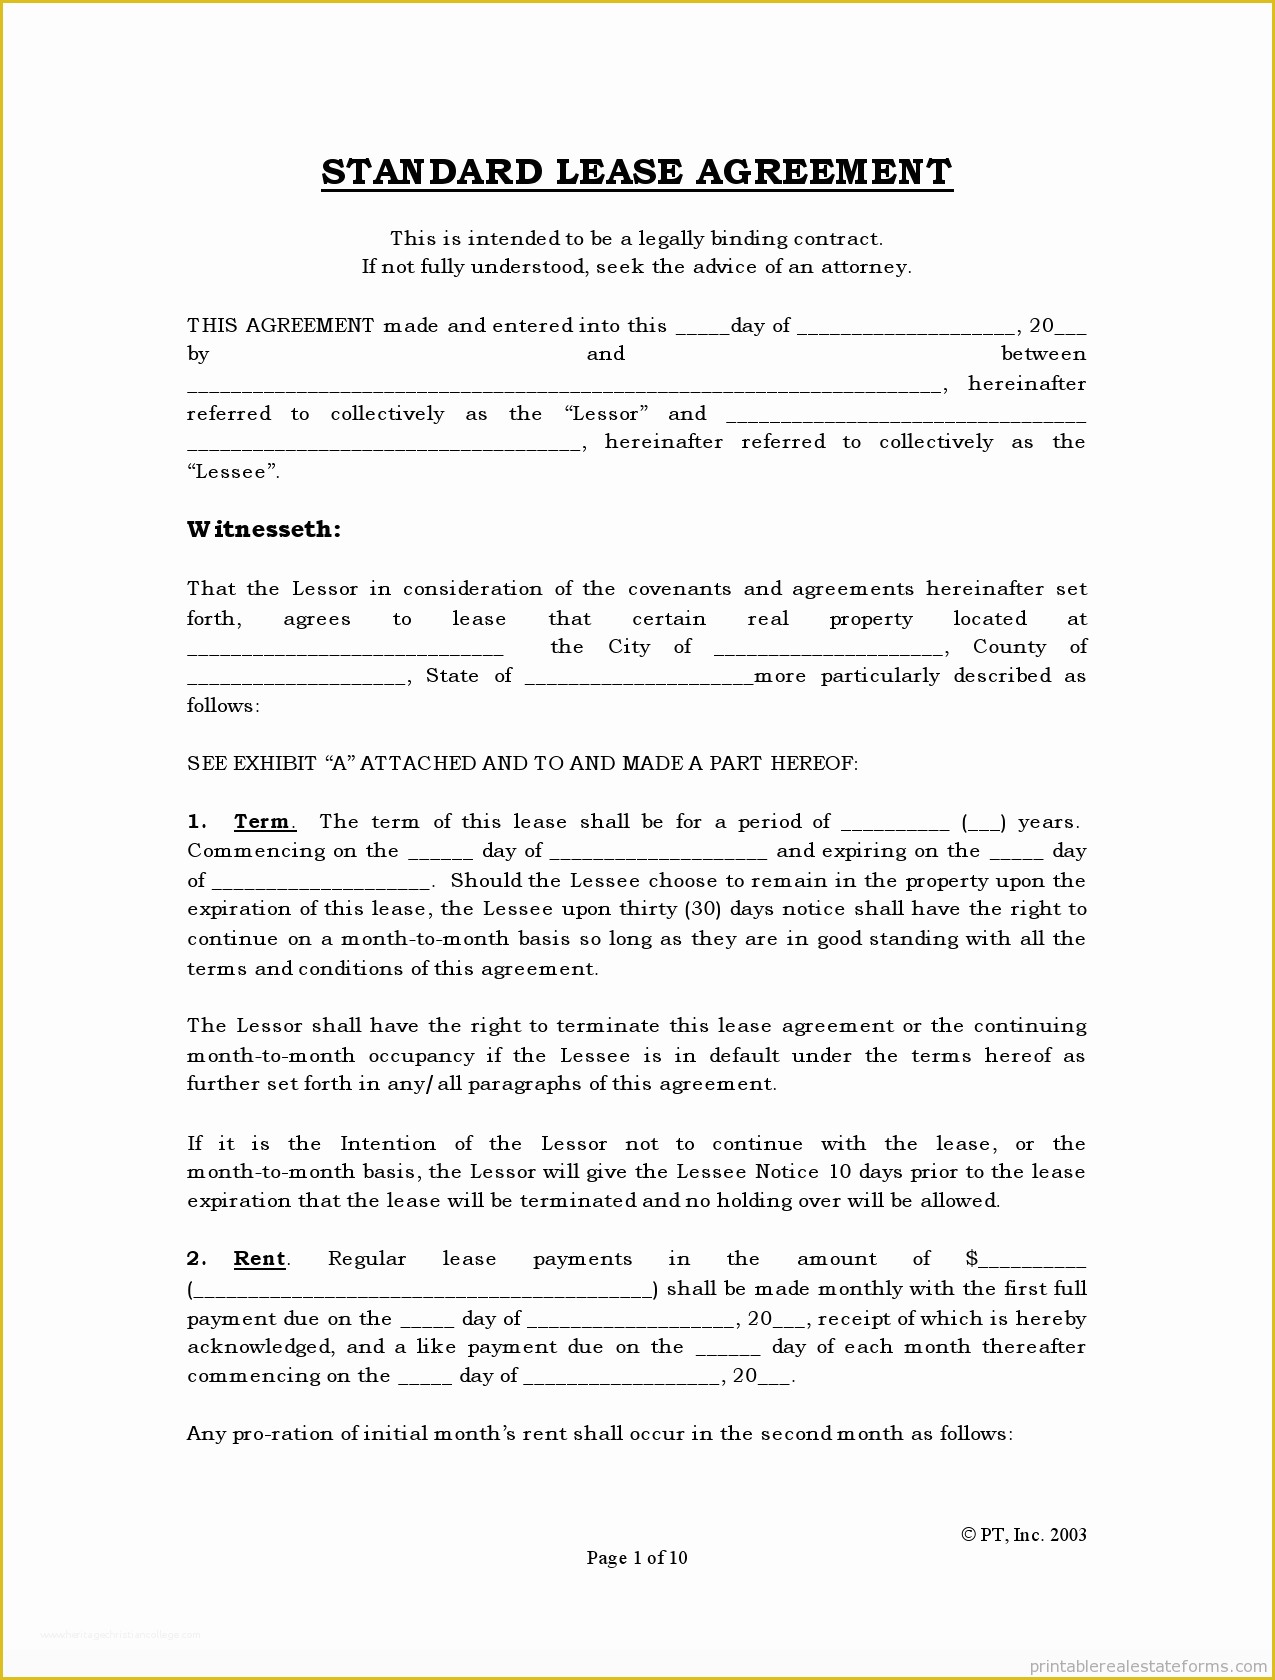 Free Landlord Lease Agreement Template Of Free Rental Agreements to Print